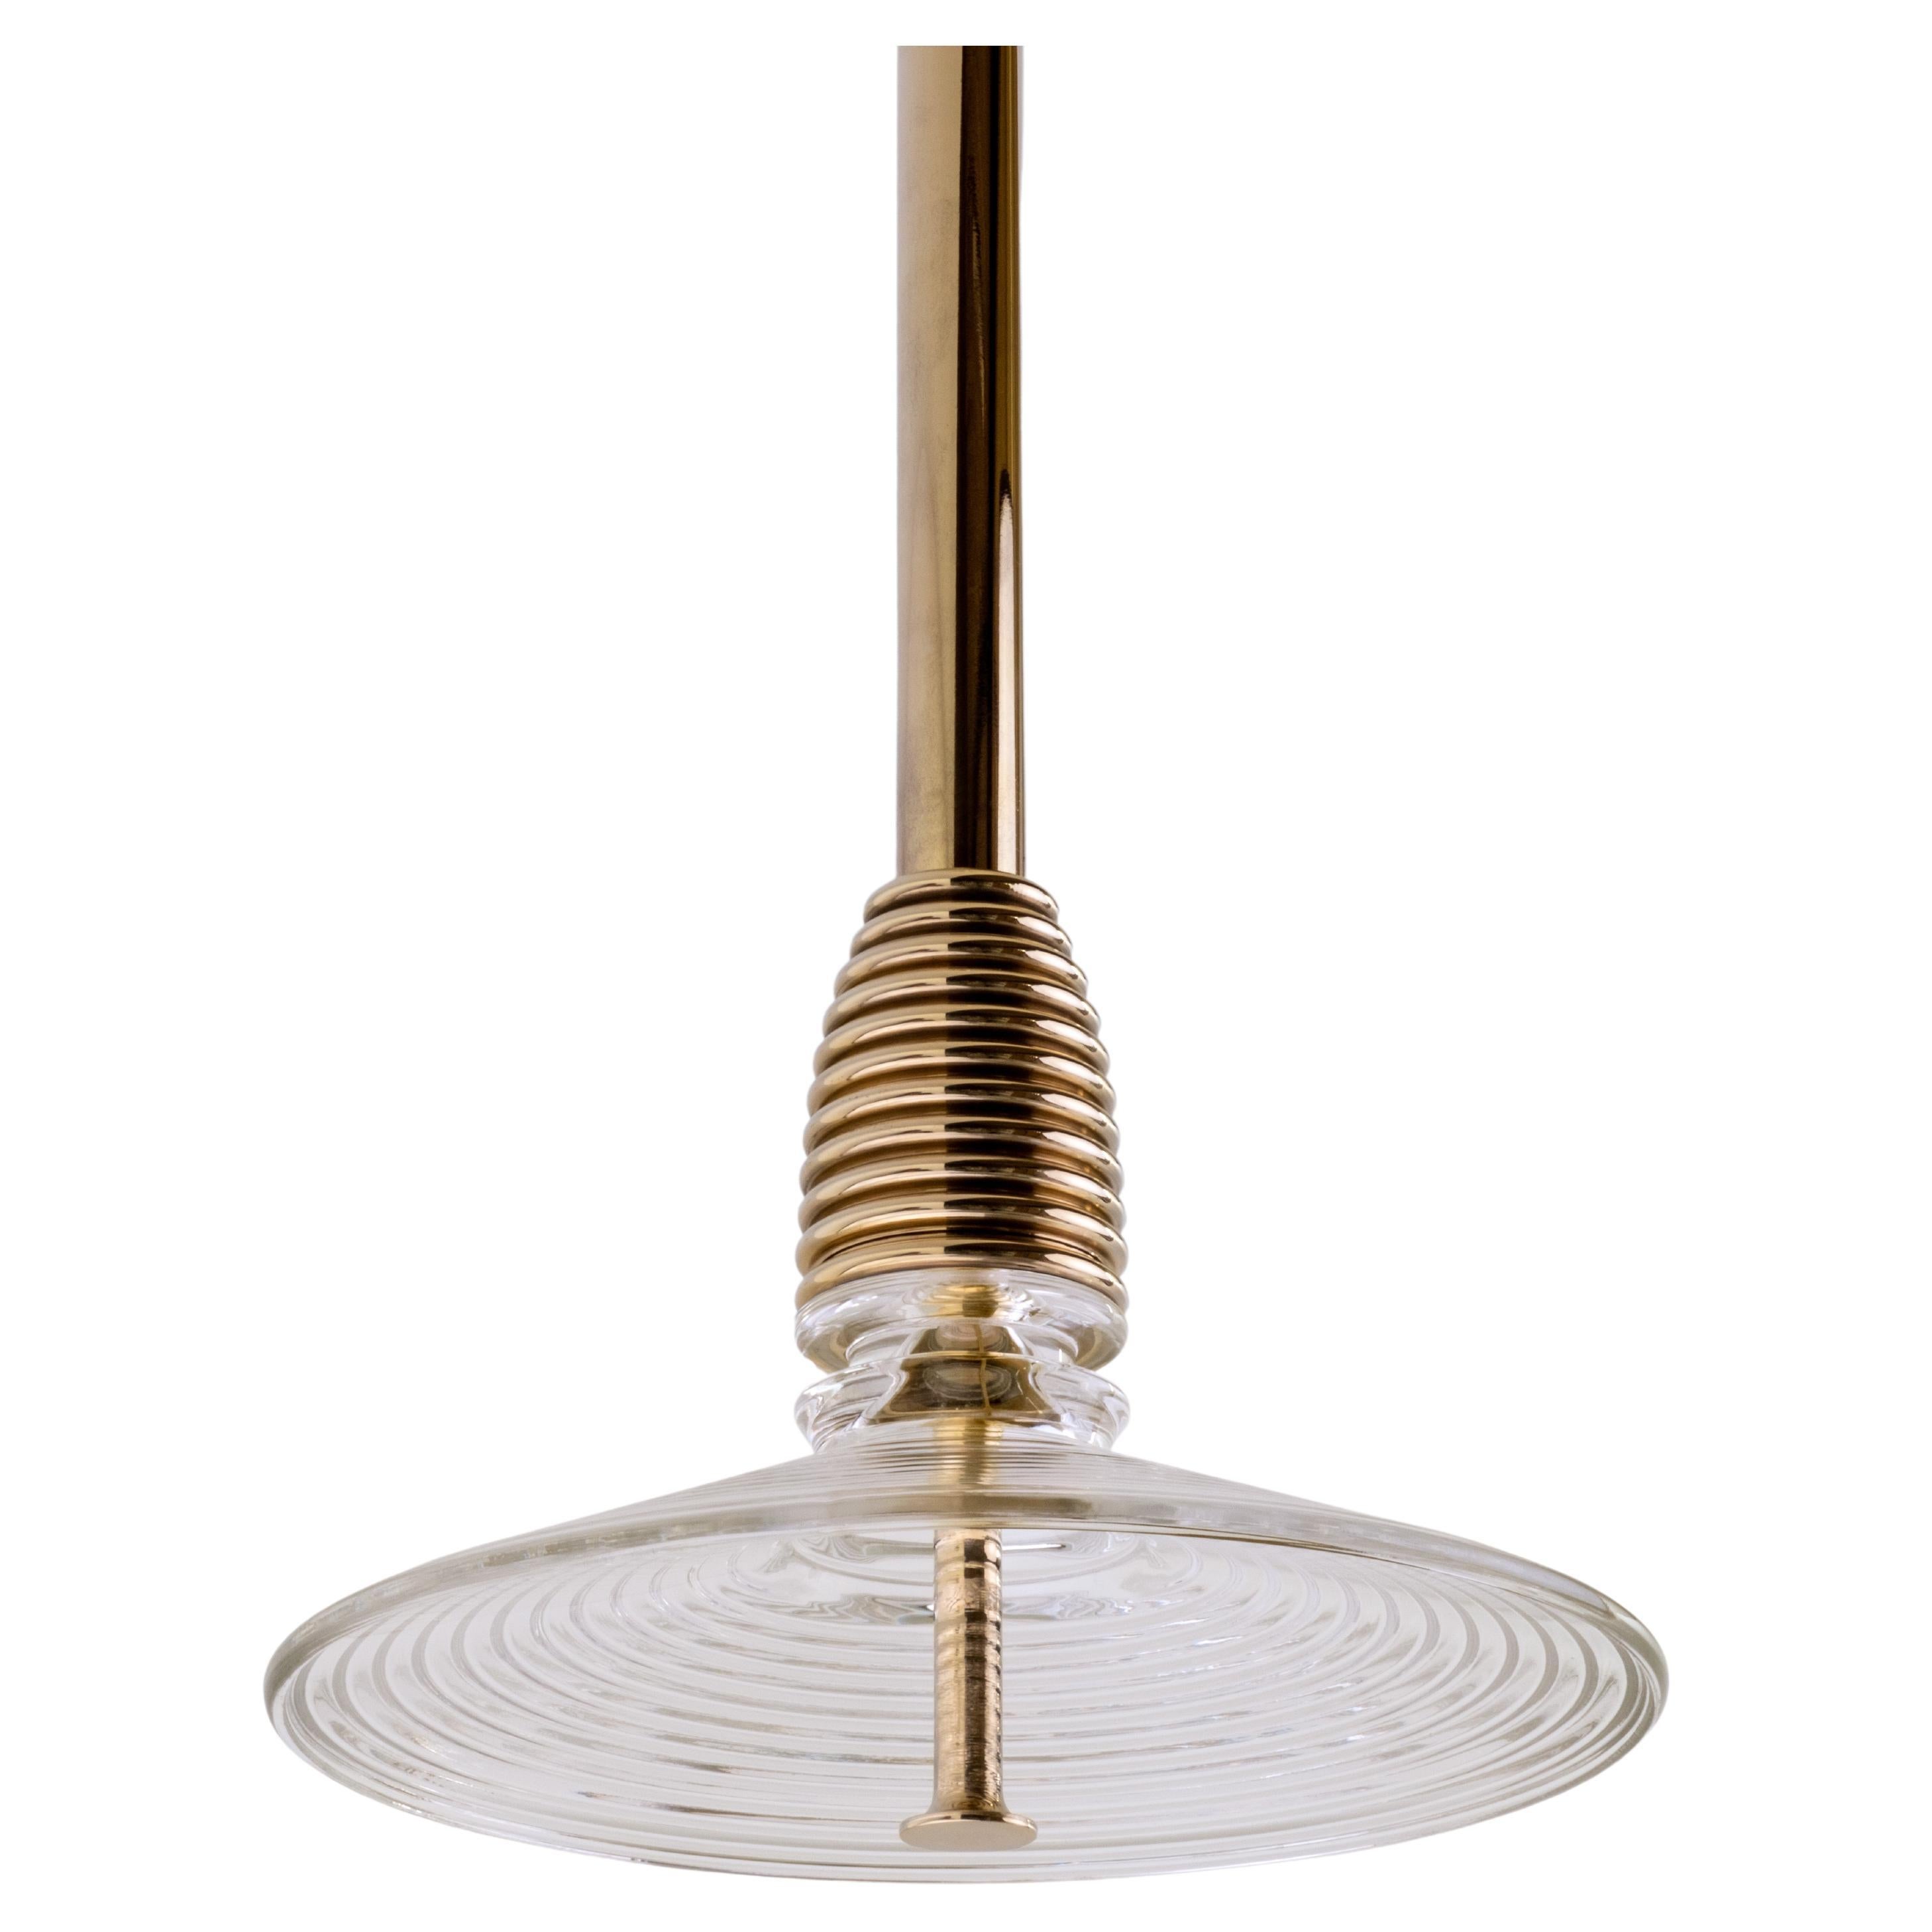 The Insulator 'B' Pendant in polished brass and clear glass by NOVOCASTRIAN deco For Sale